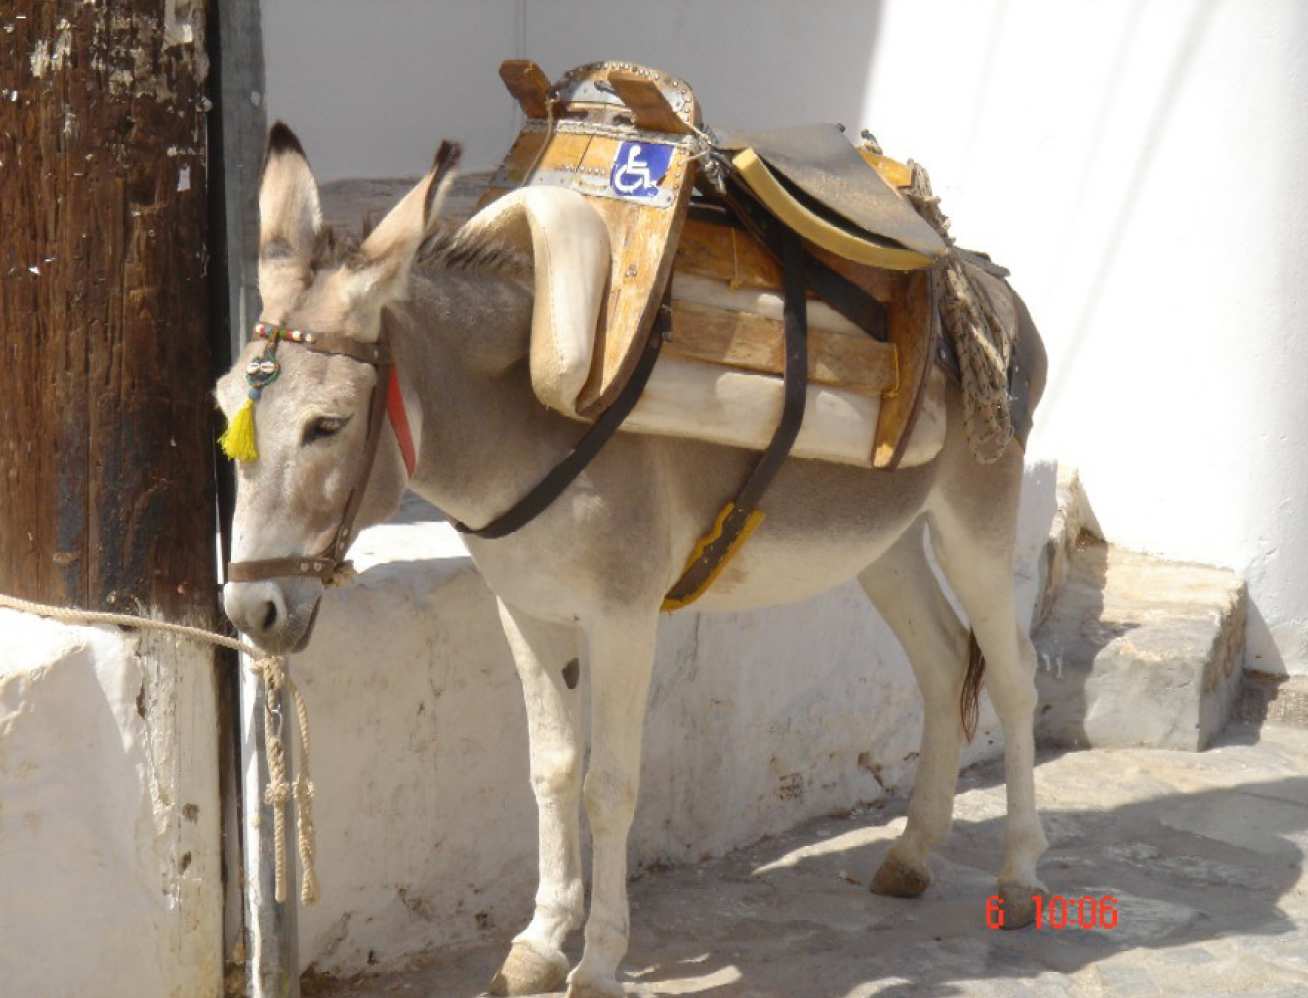 Donkey for the handicapped, Olympic 2004 in Greece